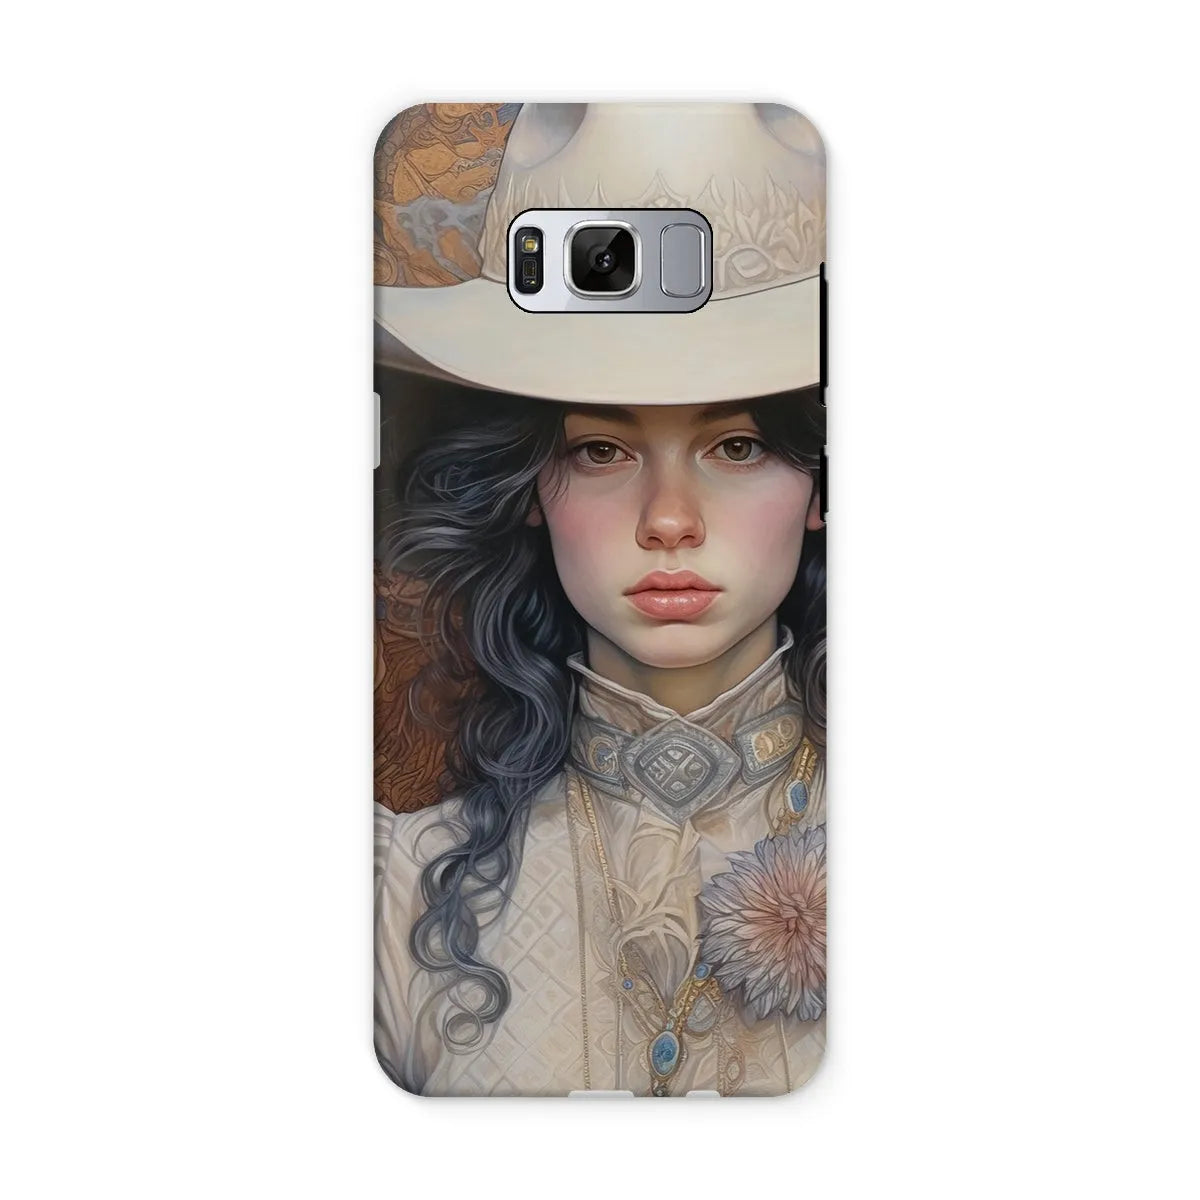 Helena The Lesbian Cowgirl - Sapphic Art Phone Case - Samsung Galaxy S8 / Matte - Mobile Phone Cases - Aesthetic Art